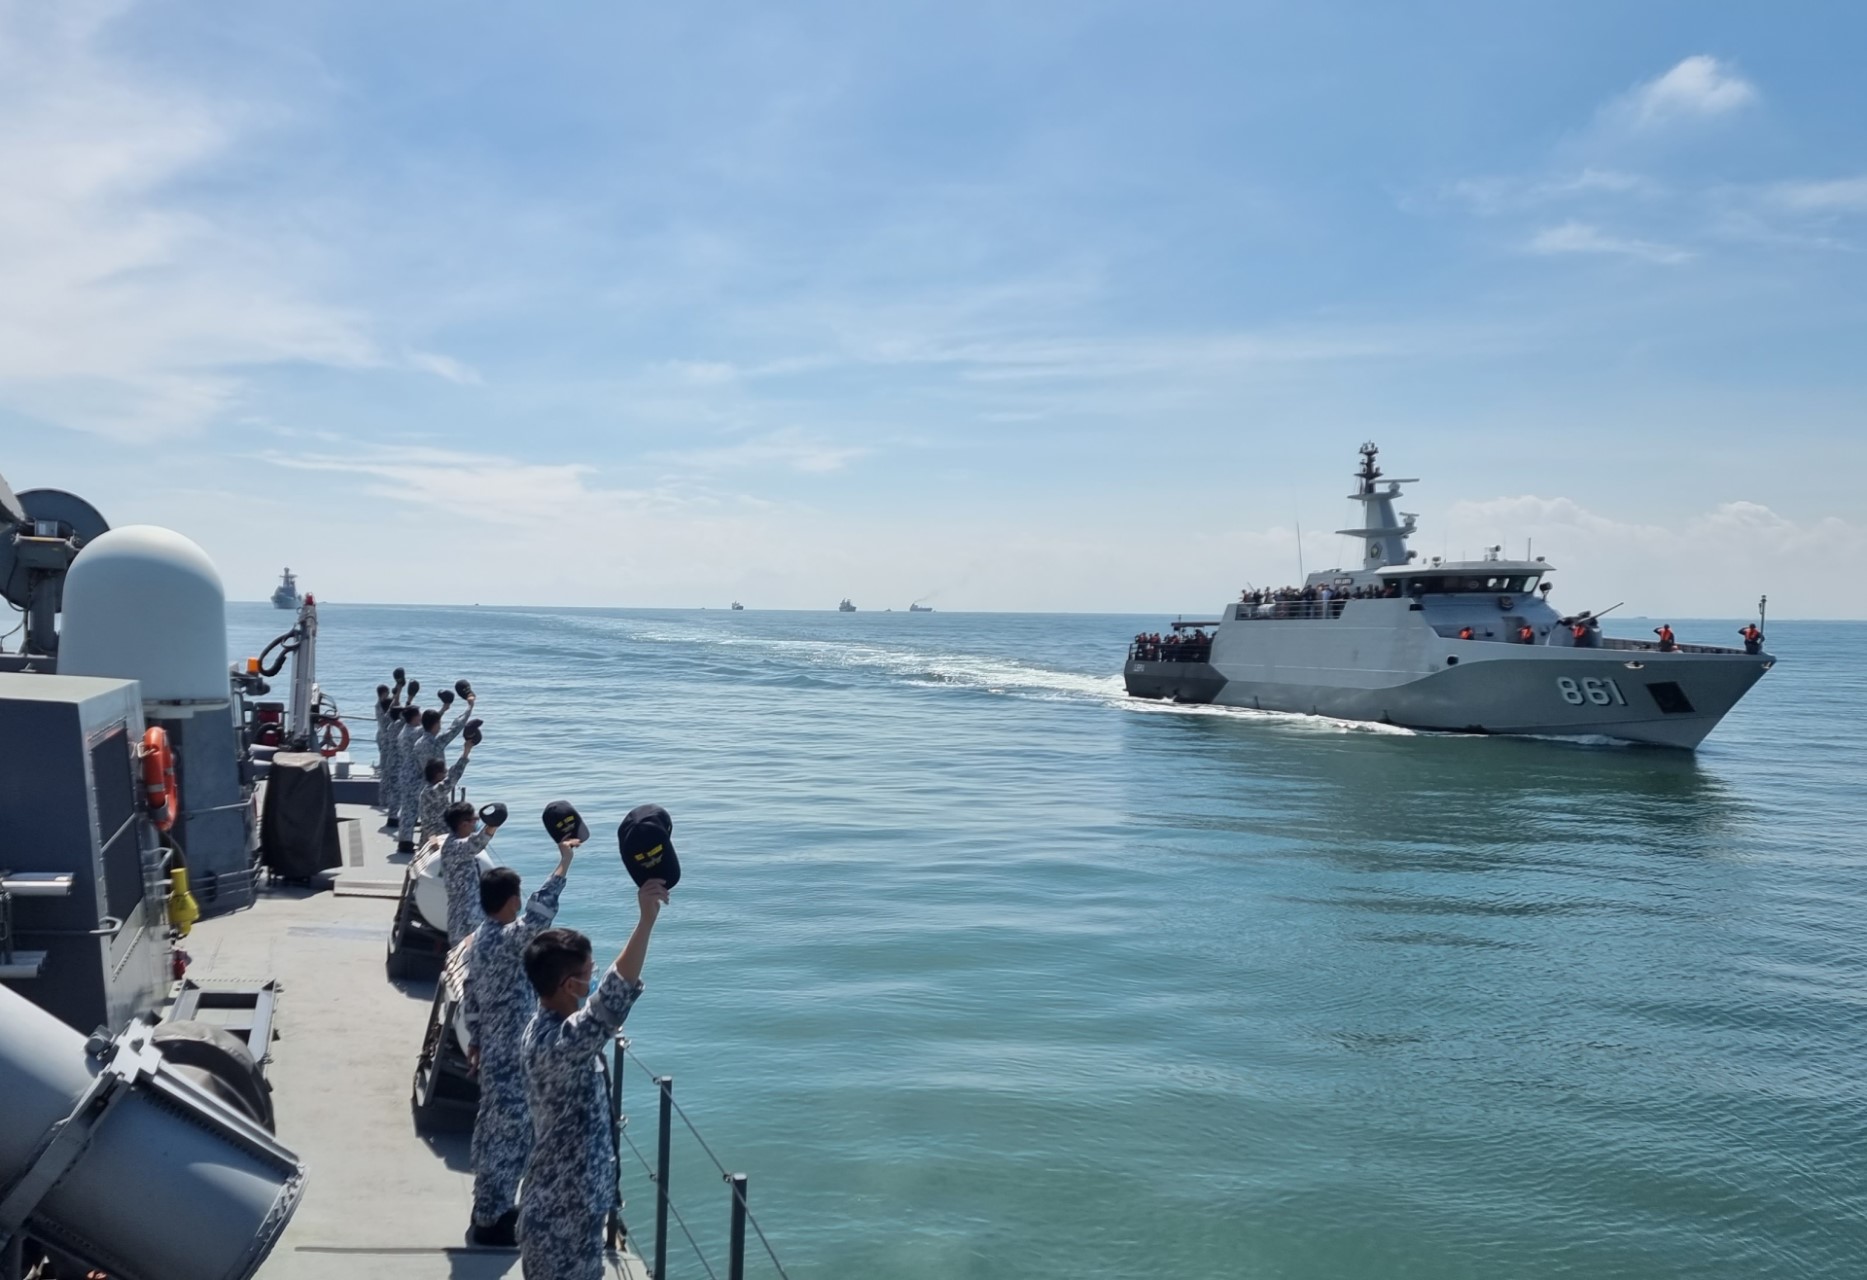 RSN personnel waving to representatives from participating countries on board KRI Lepu during an inspection of ships conducted after the opening ceremony of the ASEAN-Russia Maritime Exercise.